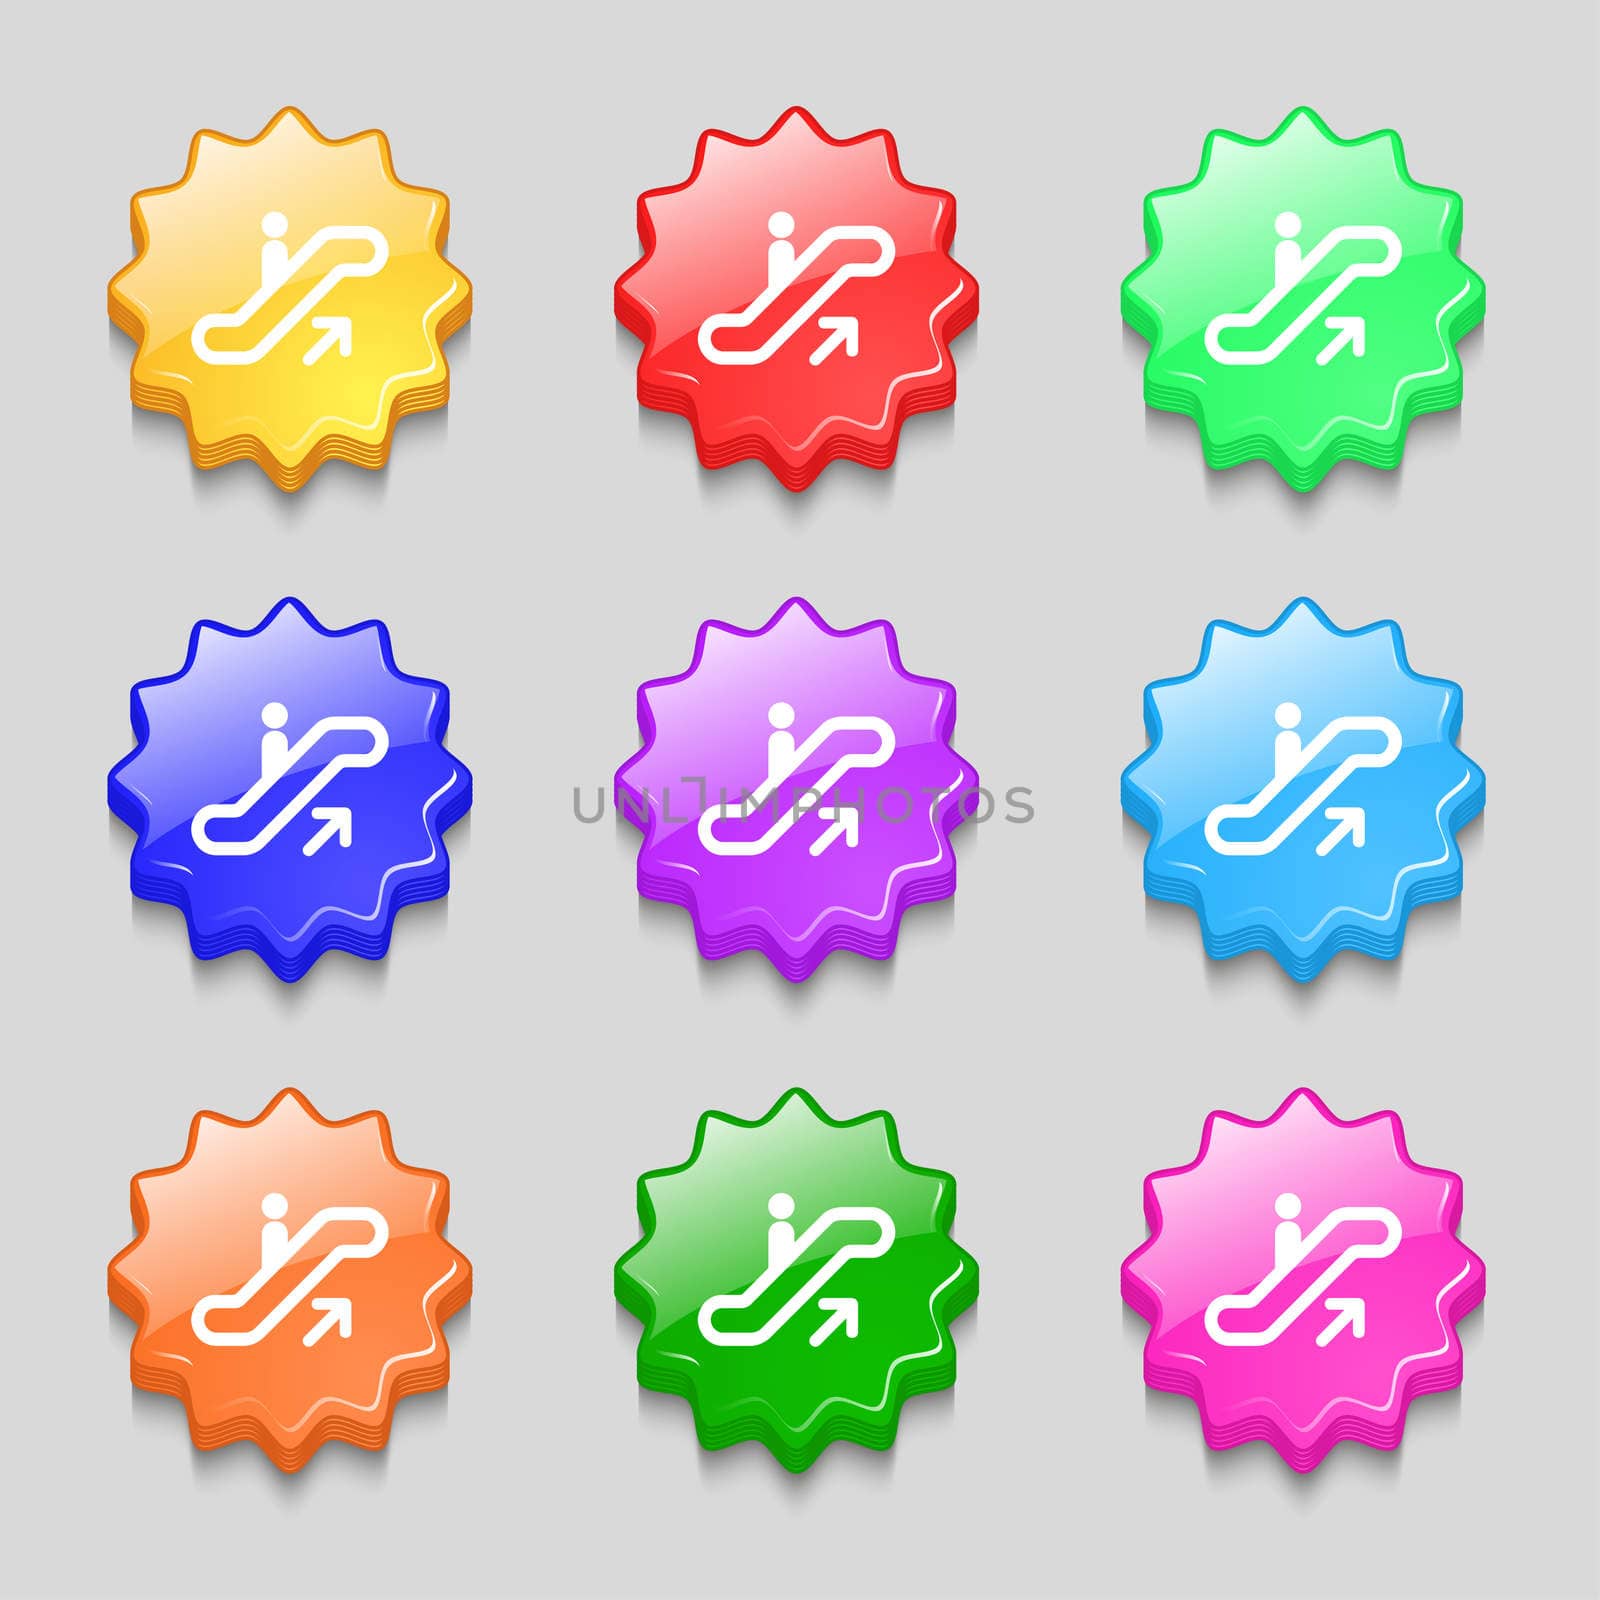 elevator, Escalator, Staircase icon sign. symbol on nine wavy colourful buttons. illustration